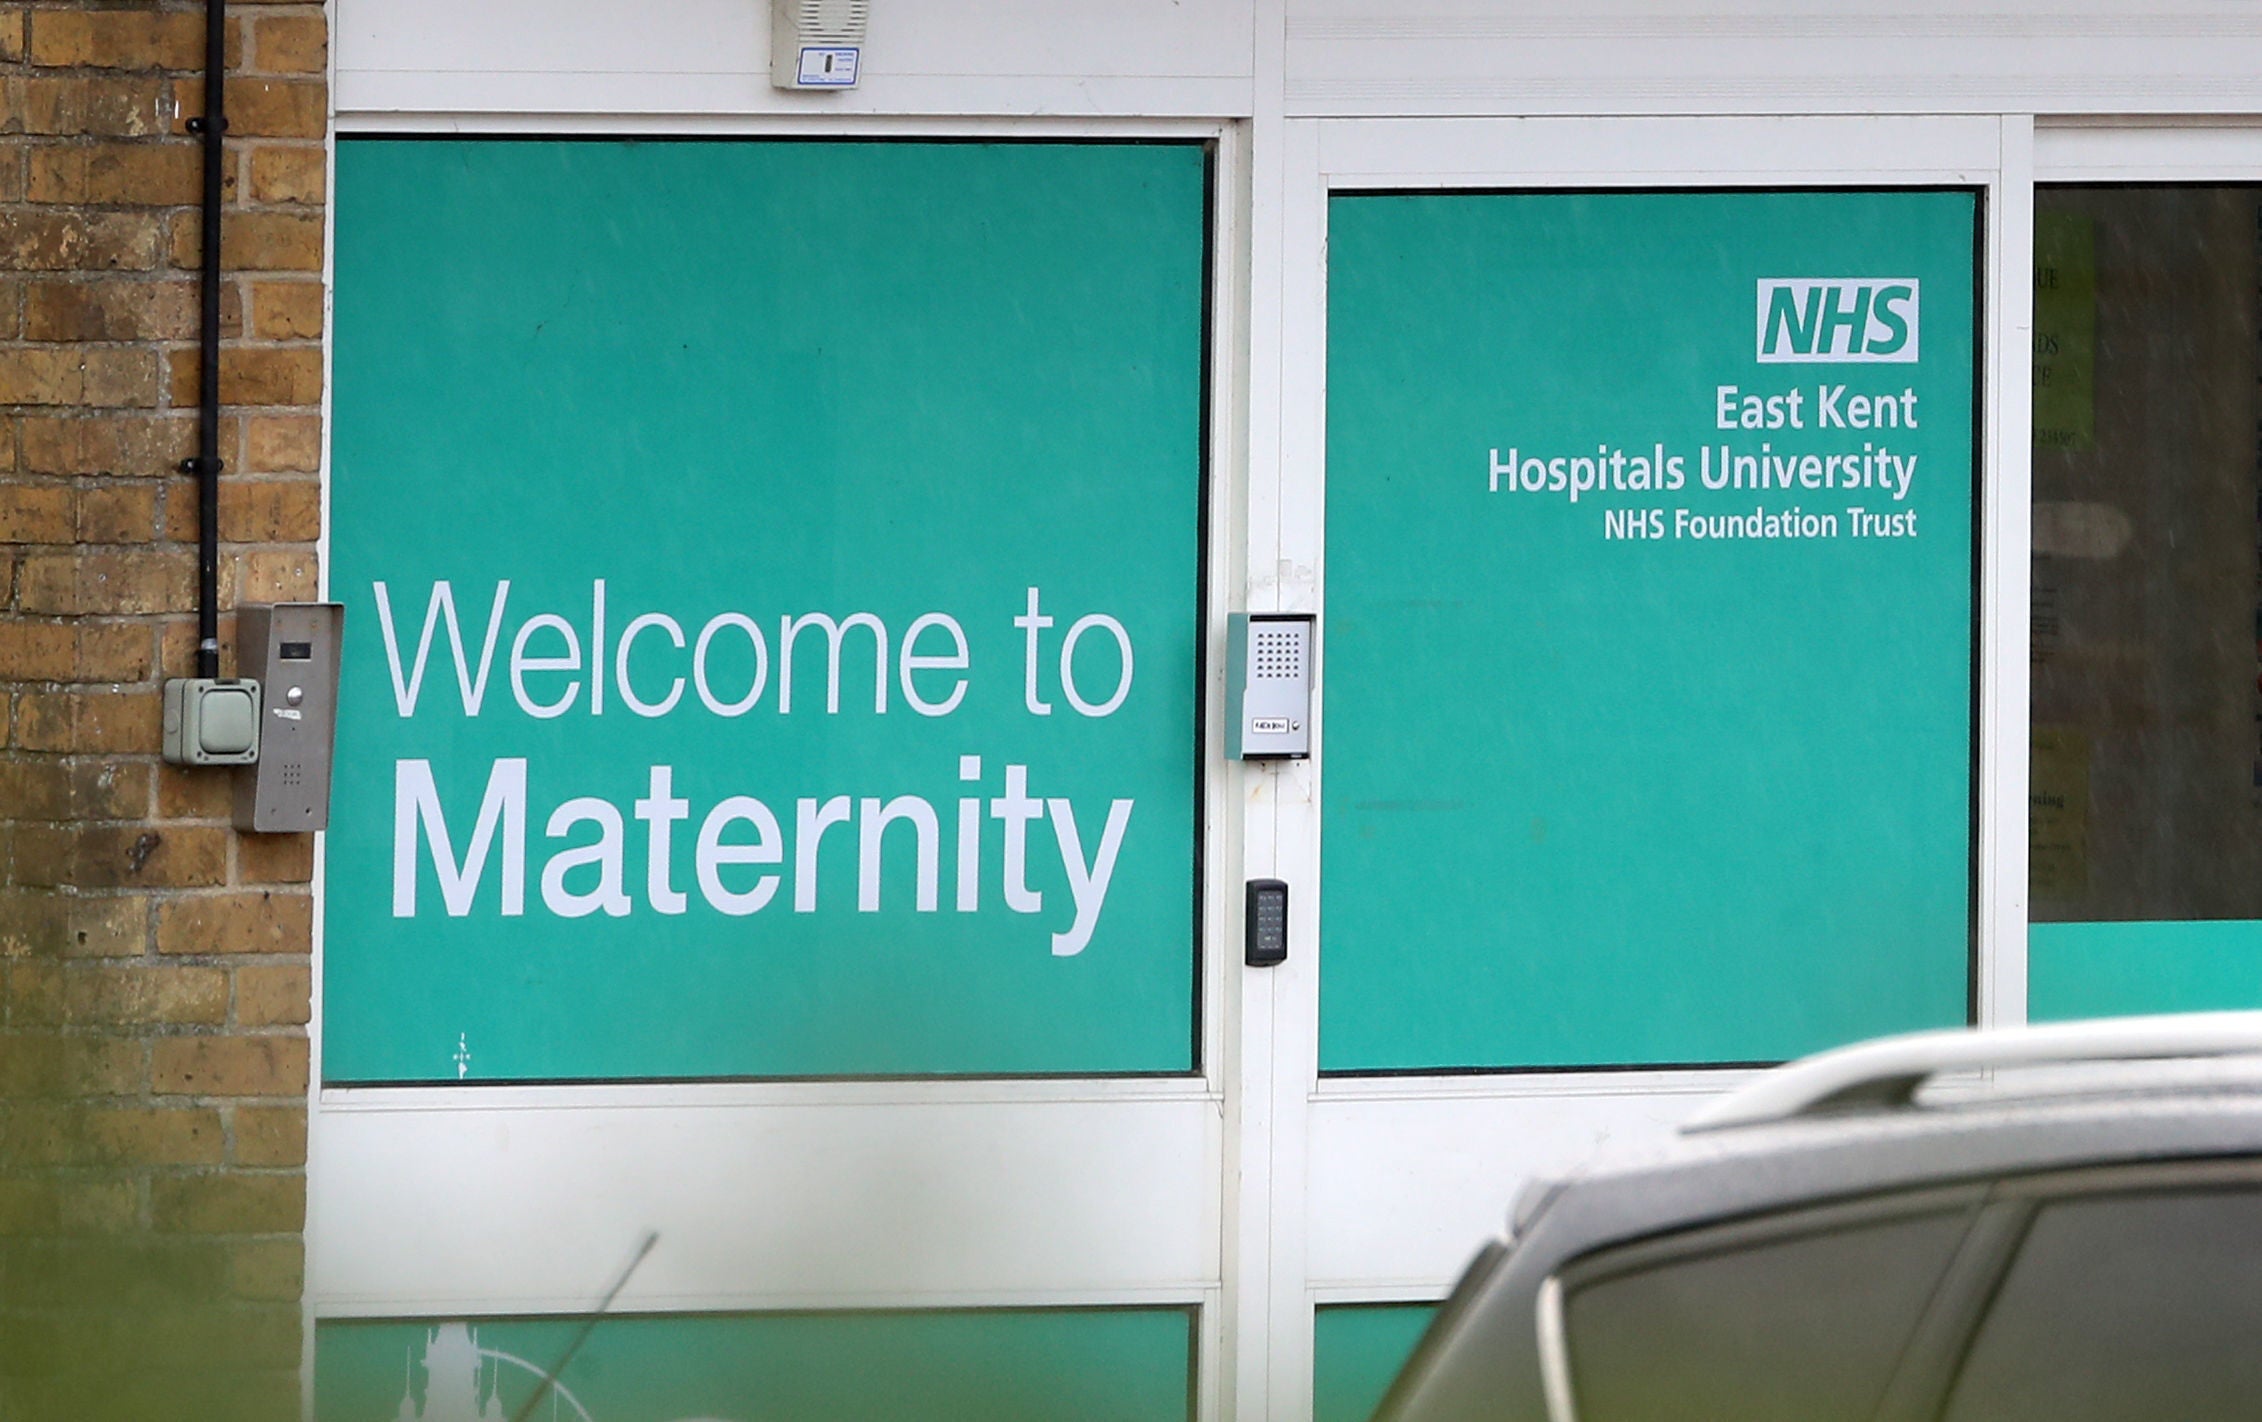 A view of the entrance to the maternity unit of the Queen Elizabeth the Queen Mother (QEQM) Hospital in Margate, Kent, part of the East Kent Hospitals University NHS Foundation Trust. CQC inspectors carried out an unannounced visit in July